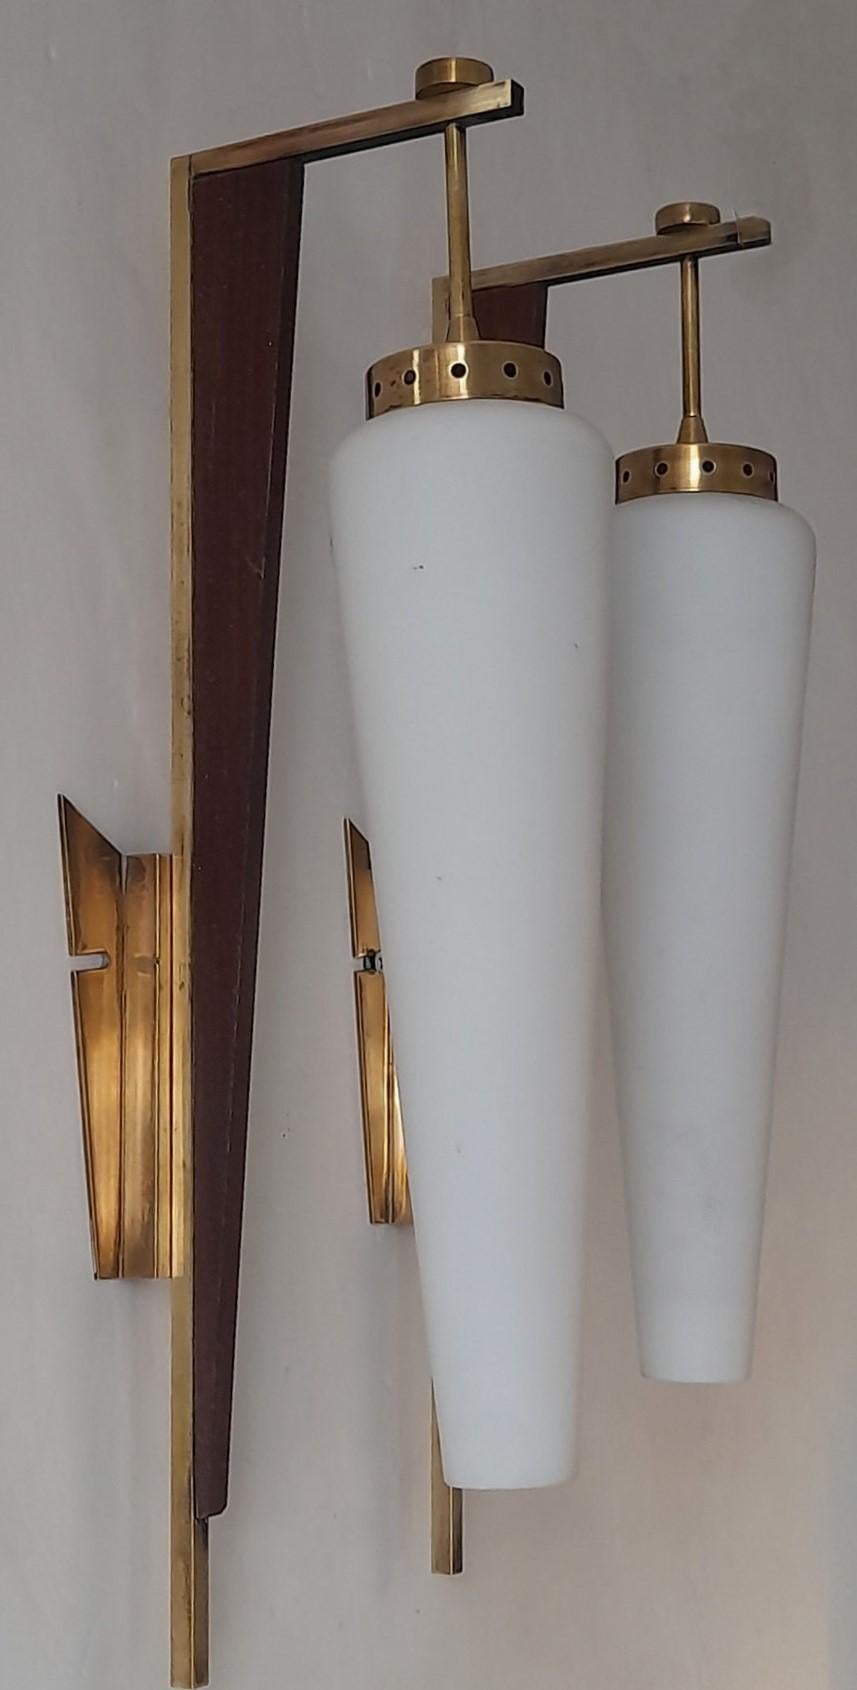 20th Century Three Stilnovo Sconces Wall Lights Brass Satin Glass Wood Accents, Italy, 1950s For Sale